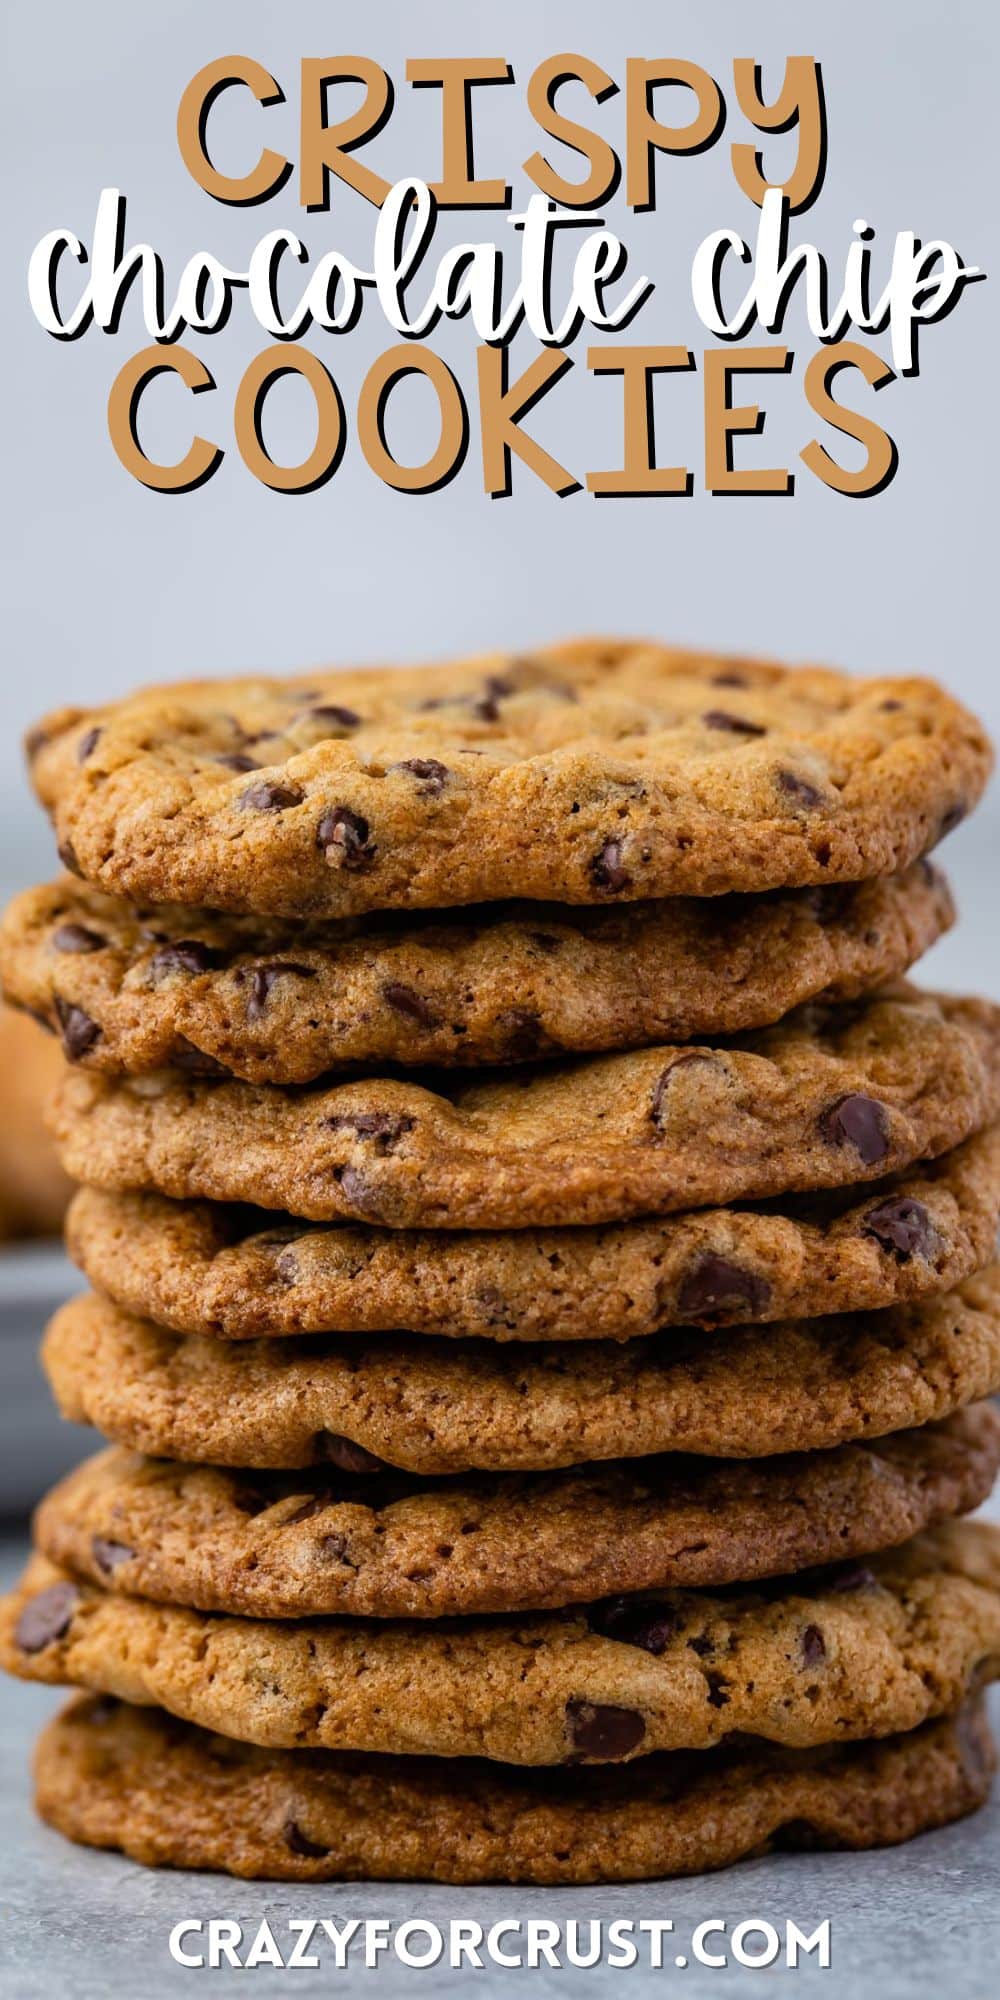 large stack of chocolate chip cookies with words on the image.